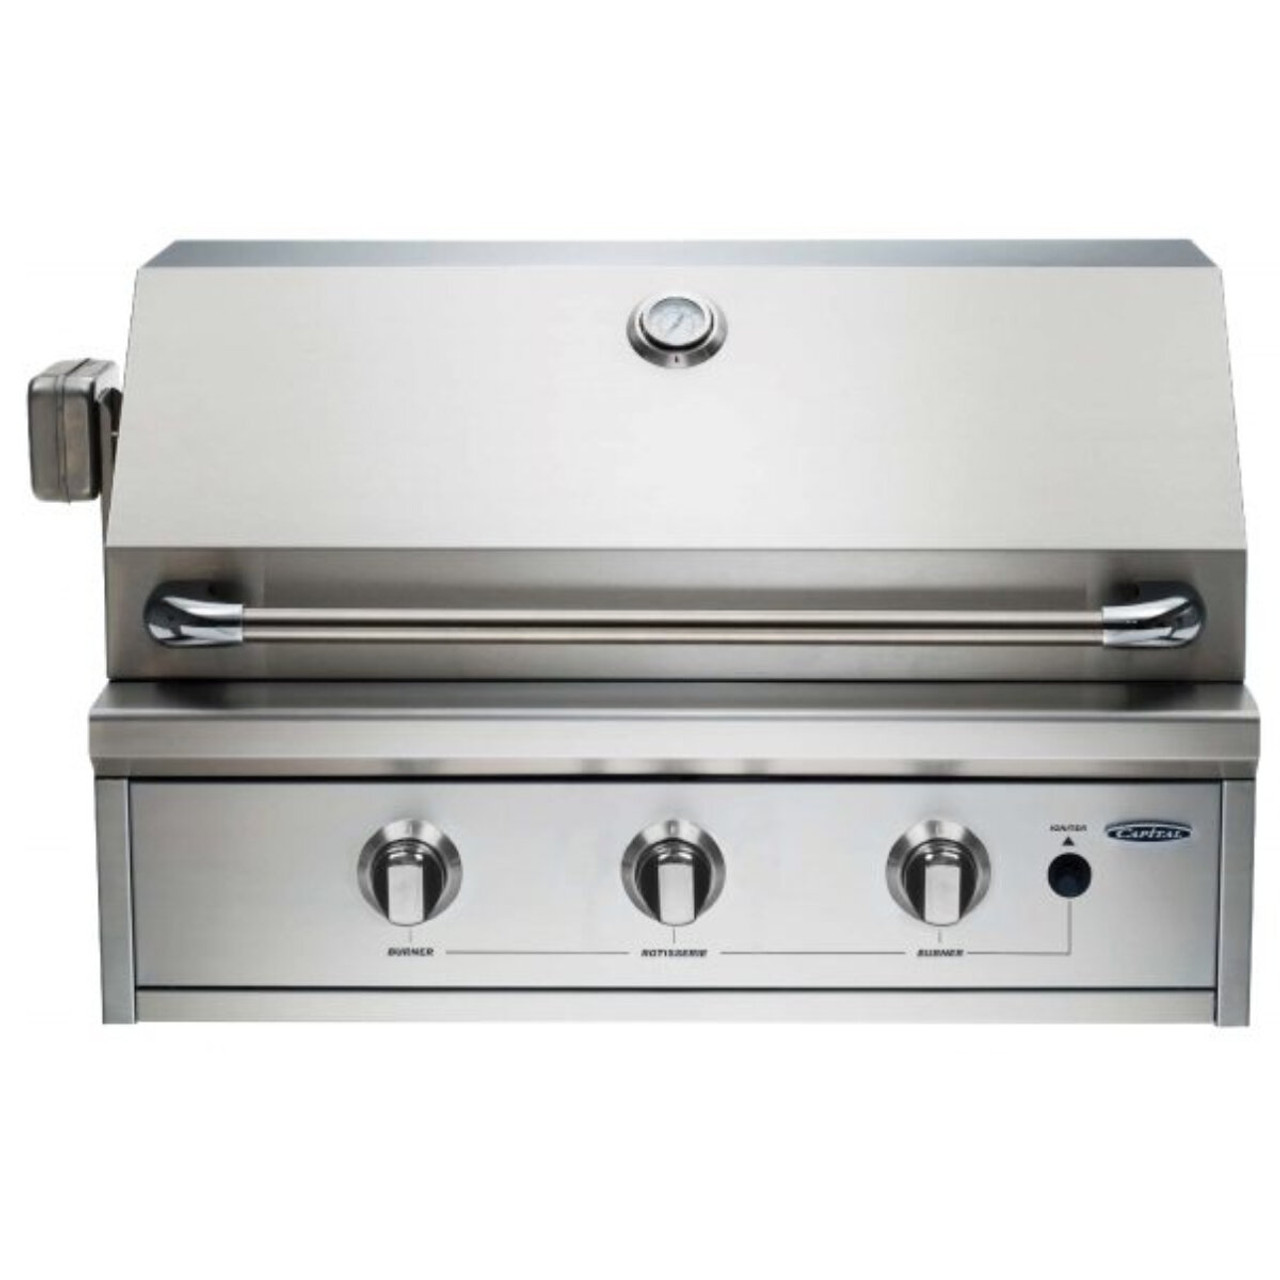 PRO32RBIL - 82cm Built-in BBQ with Open Grill LPG - Stainless Steel